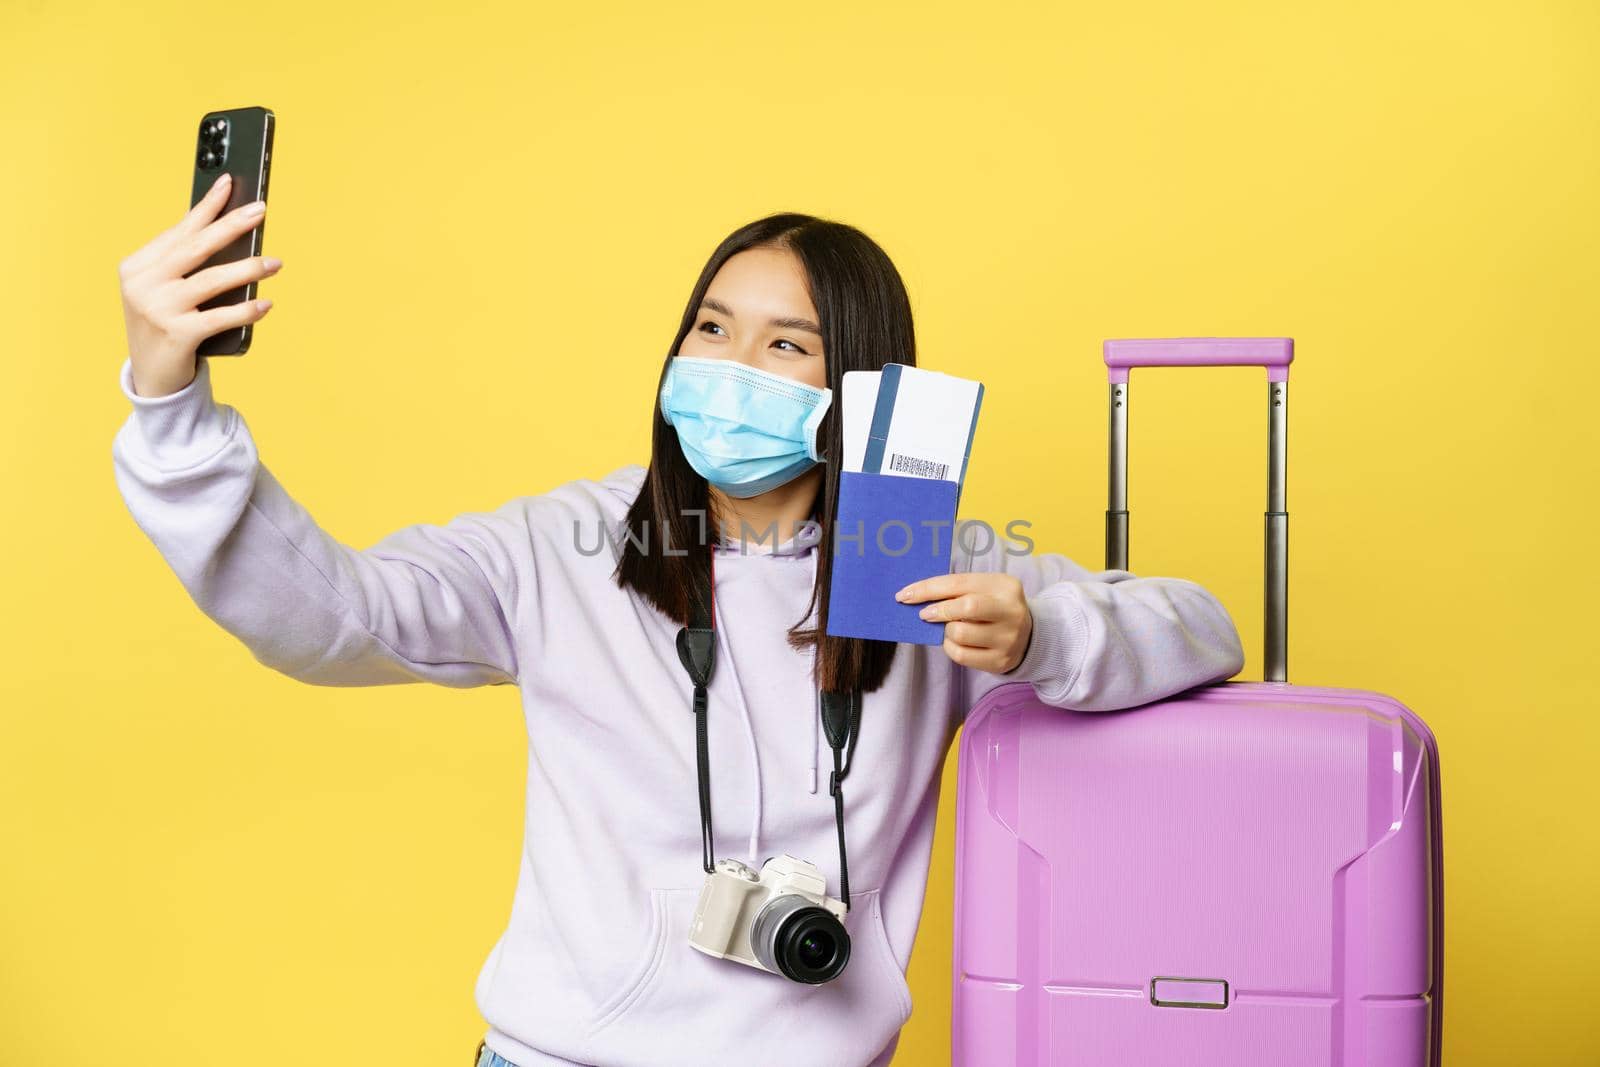 Happy asian woman taking selfie with passport and tickets near suitcase, photographing on smartphone in medical face mask, yellow background.